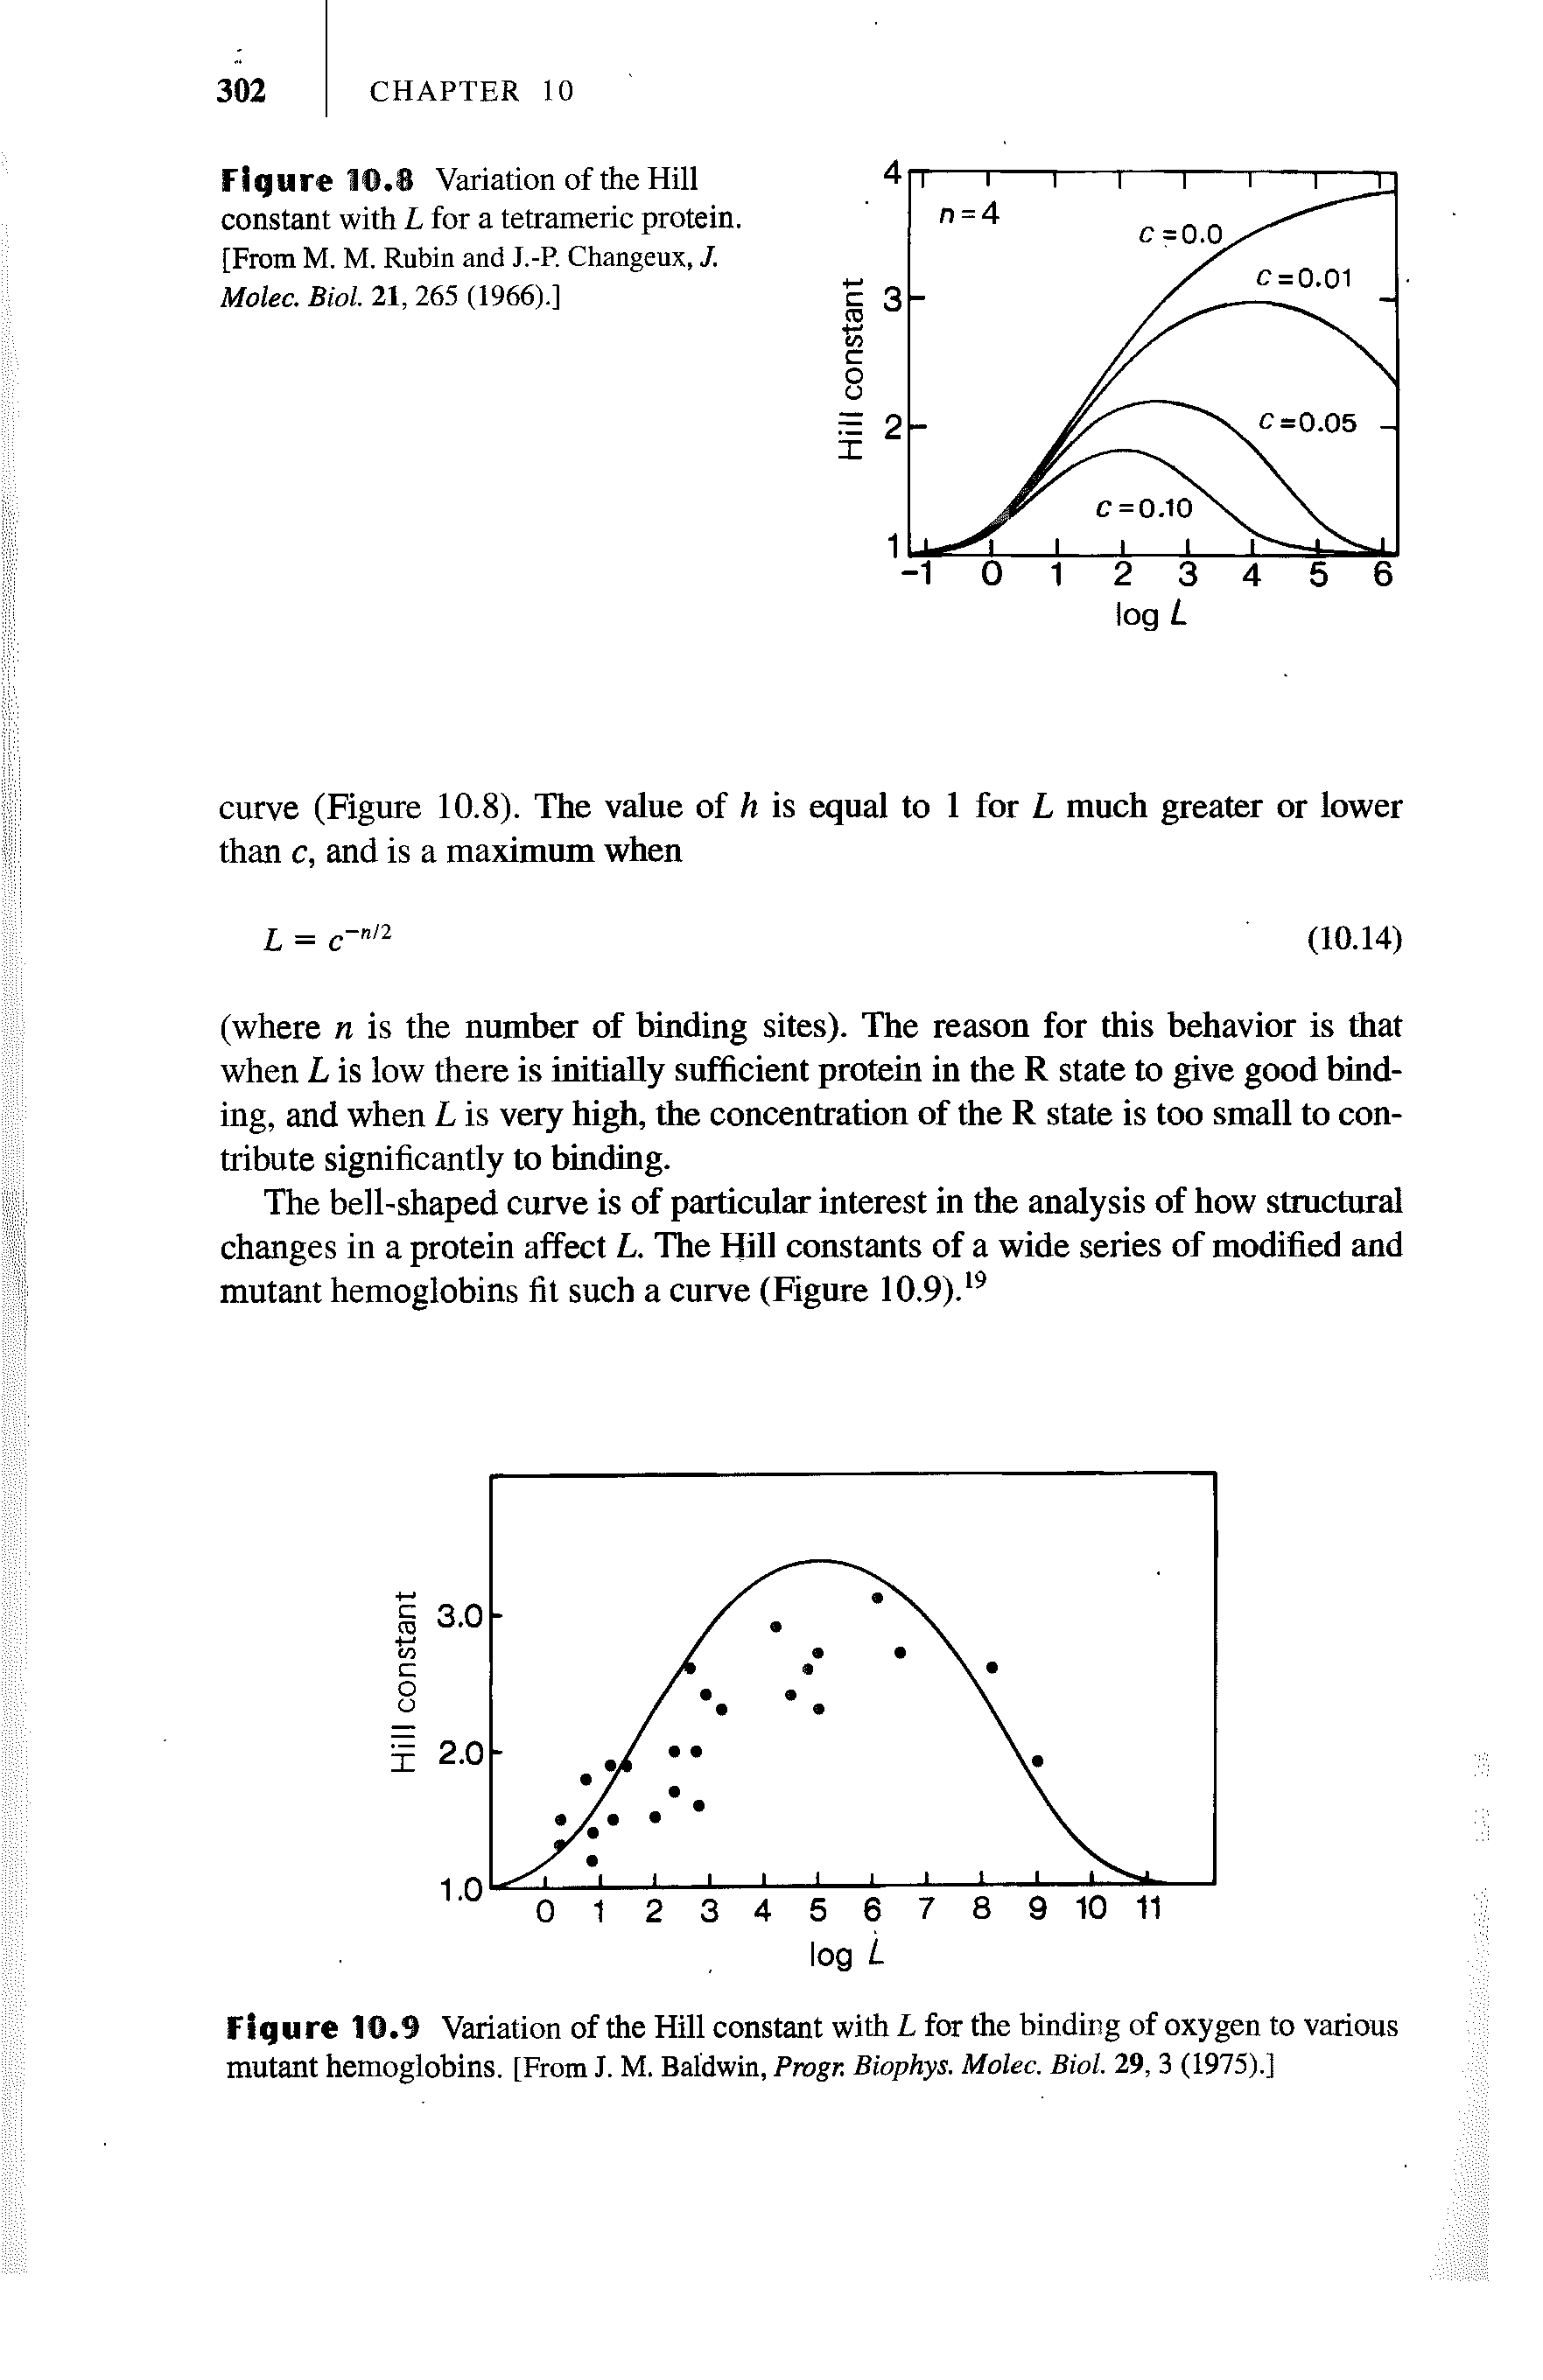 Figure 10.8 Variation of the Hill constant with L for a tetrameric protein. [From M. M. Rubin and J.-P. Changeux, J. Molec. Biol. 21, 265 (1966).]...